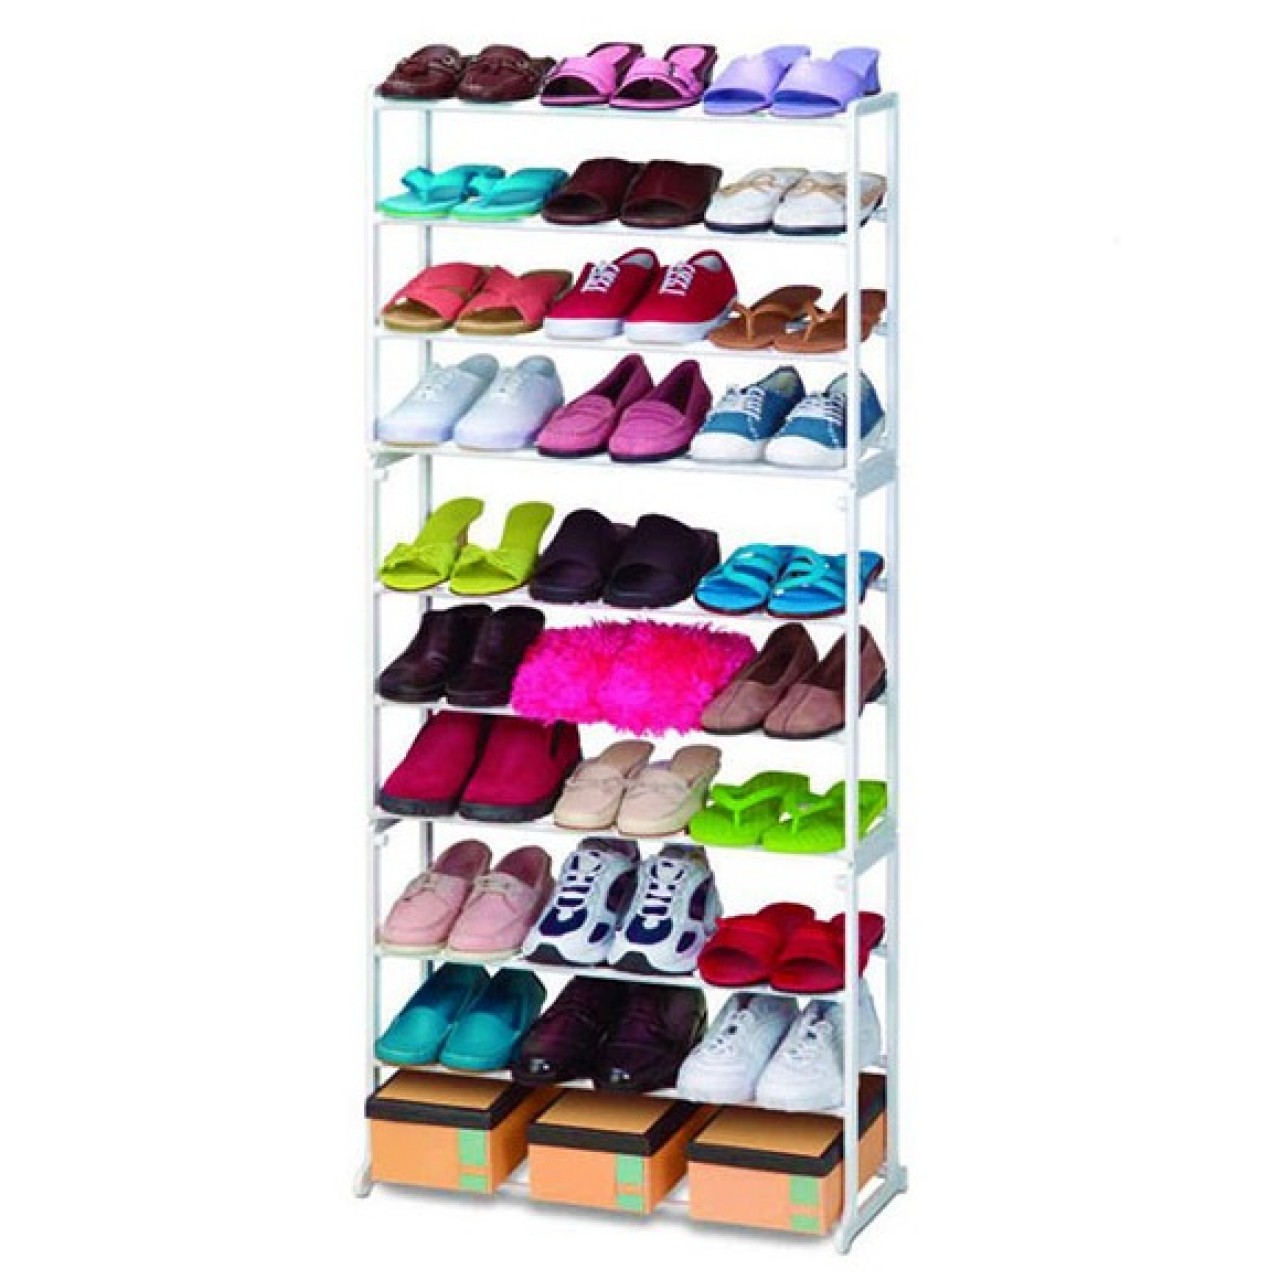 10 Tier Amazing Shoe Rack - Up to 30 Pairs of Shoes